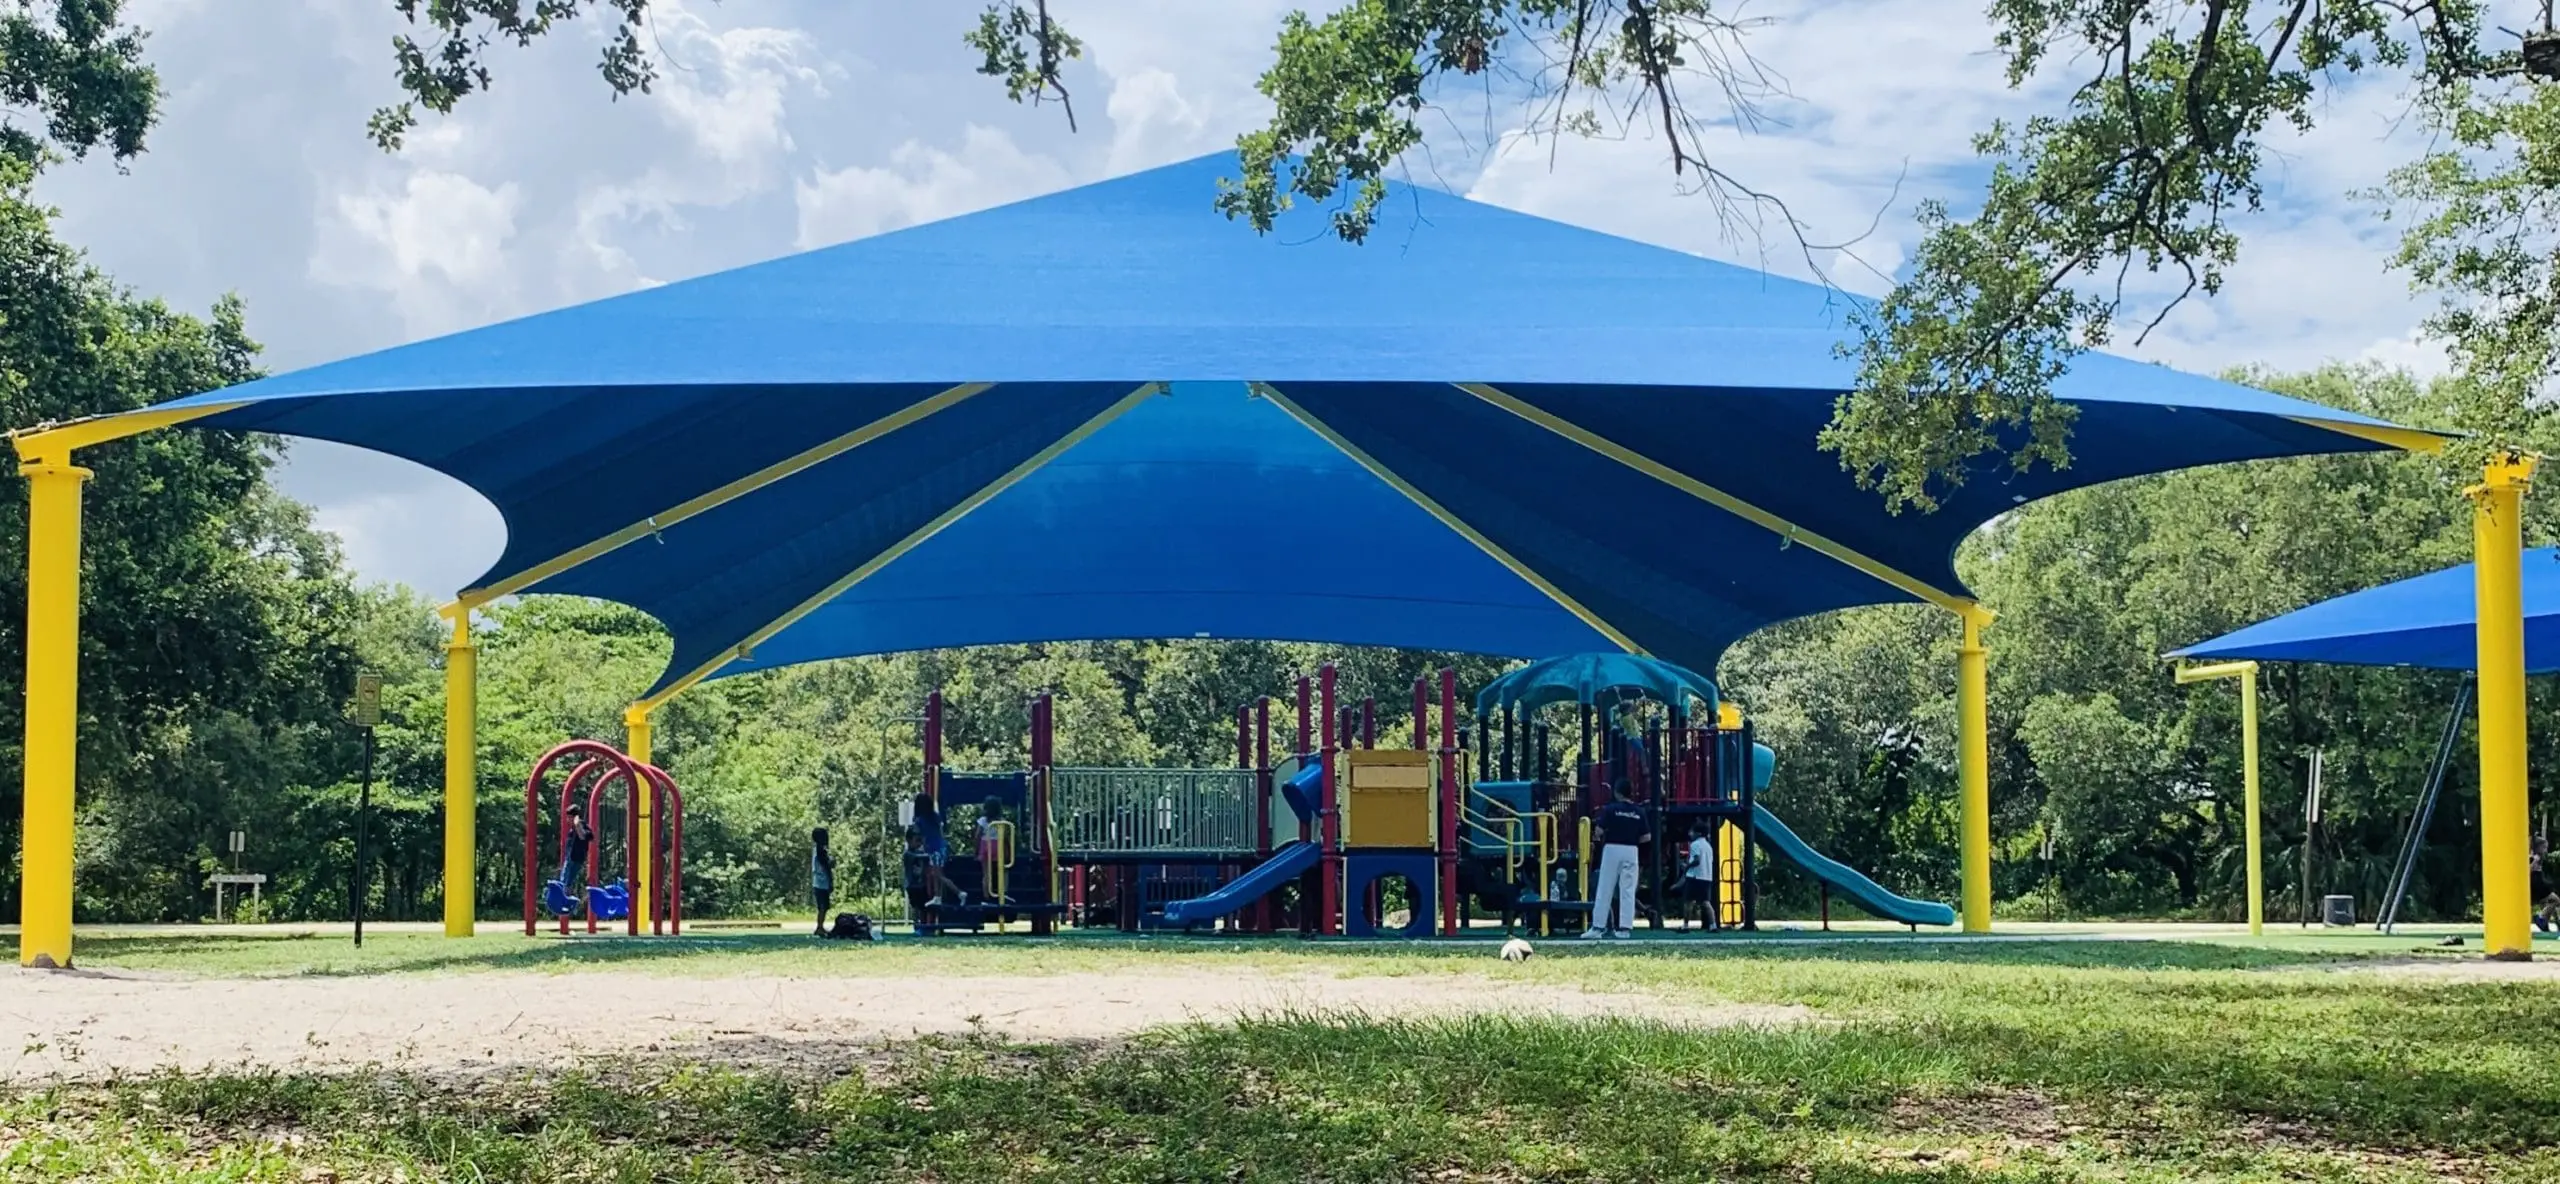 Shade Structure over a playground